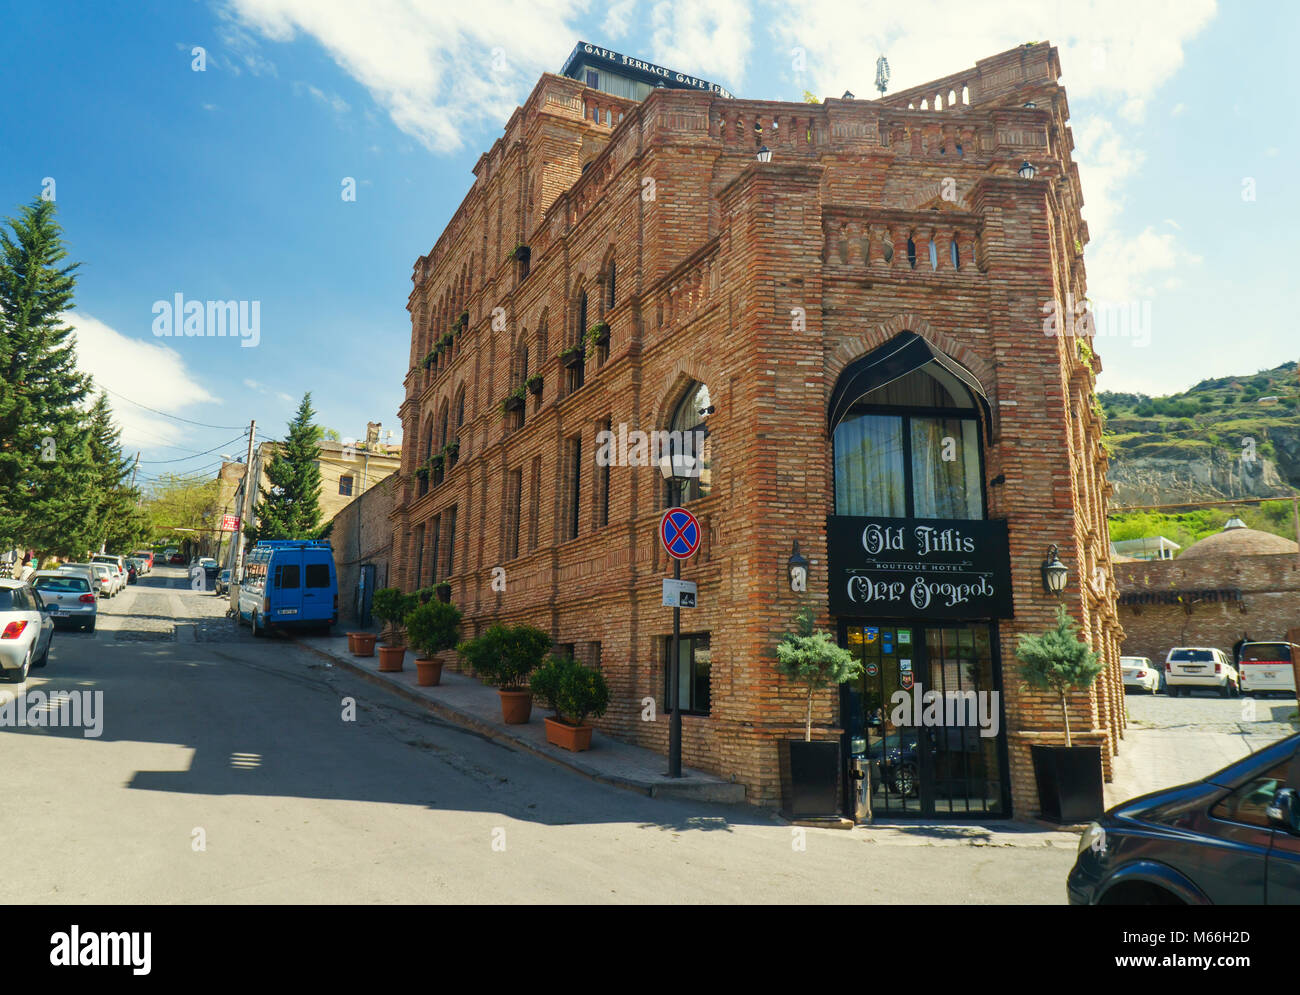 Tiflis restaurant hi-res stock photography and images - Alamy